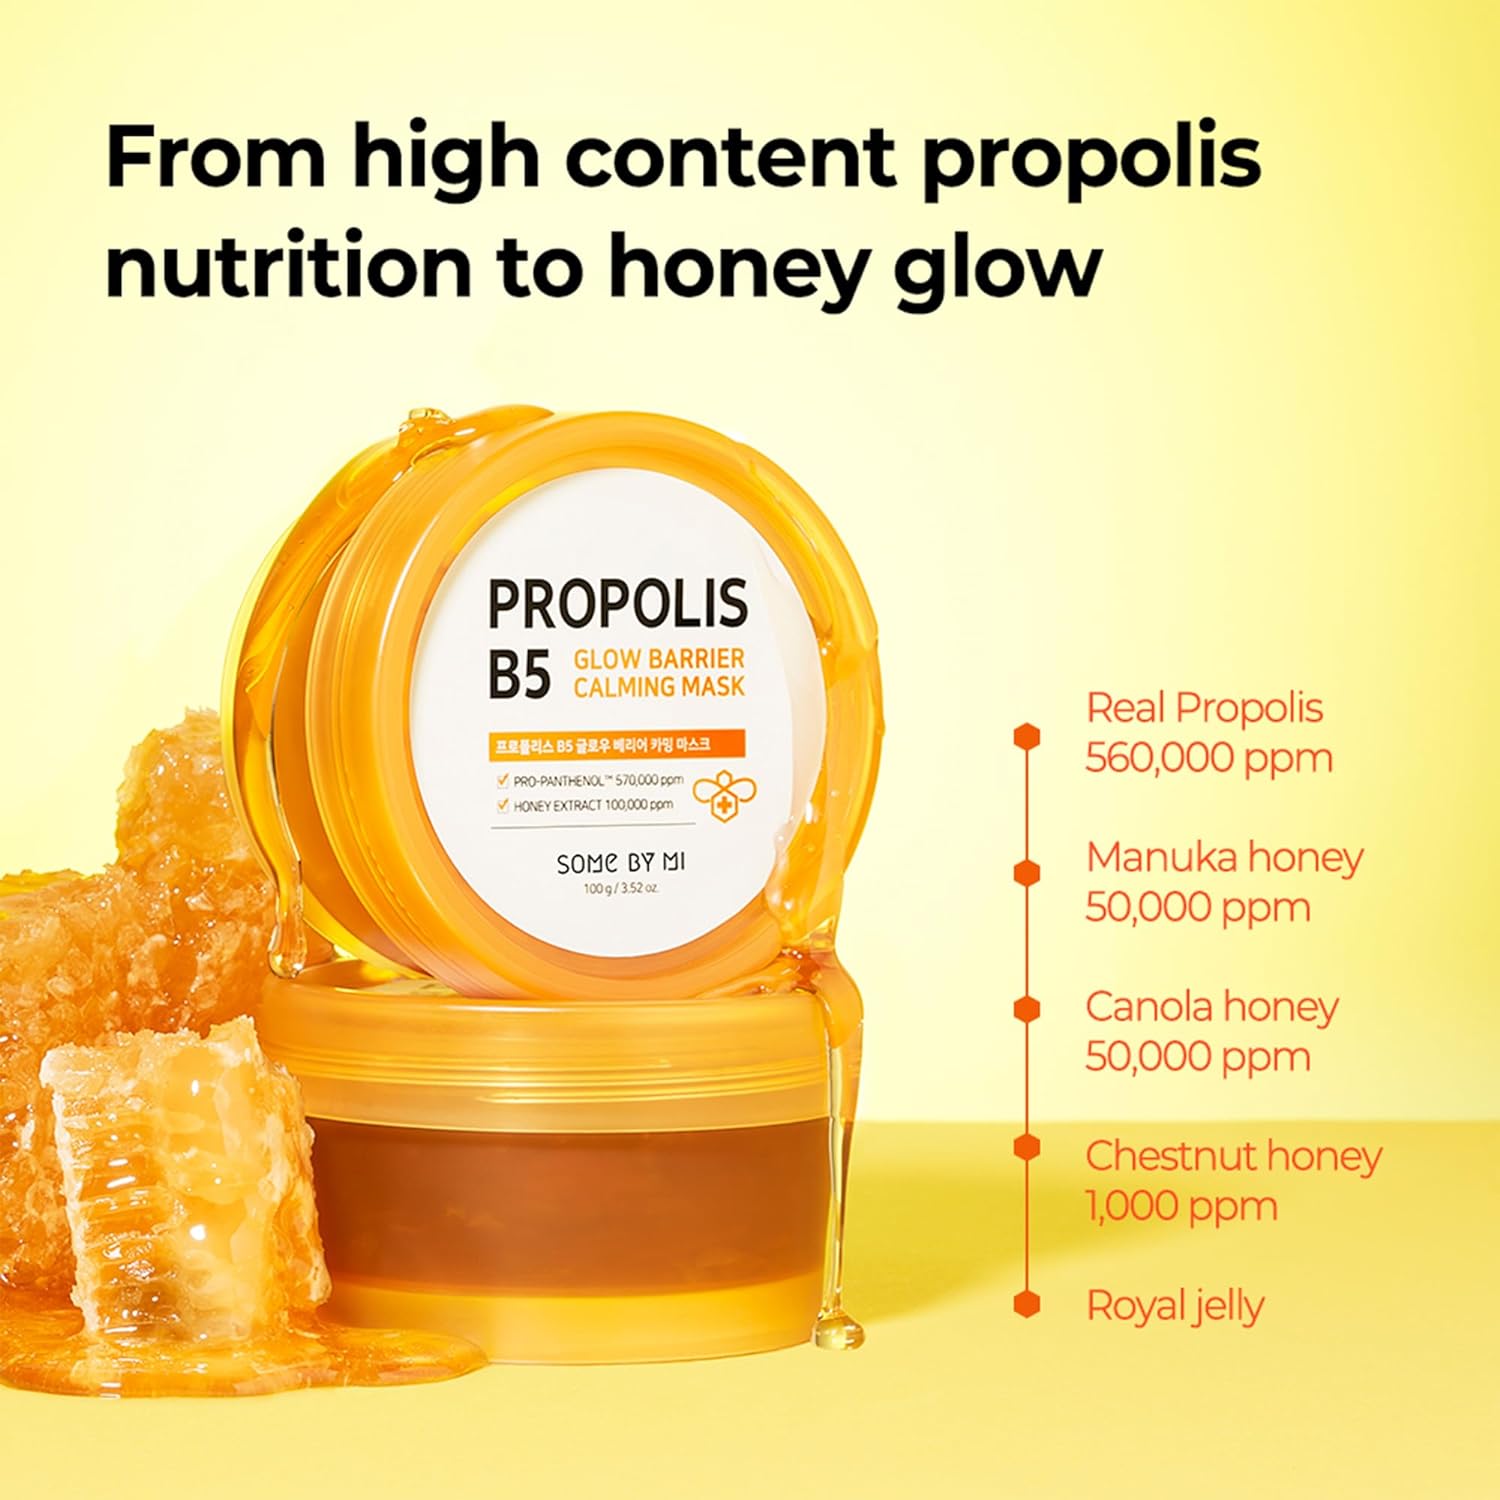 SOME BY MI Propolis B5 Grow Barrier Calming Mask